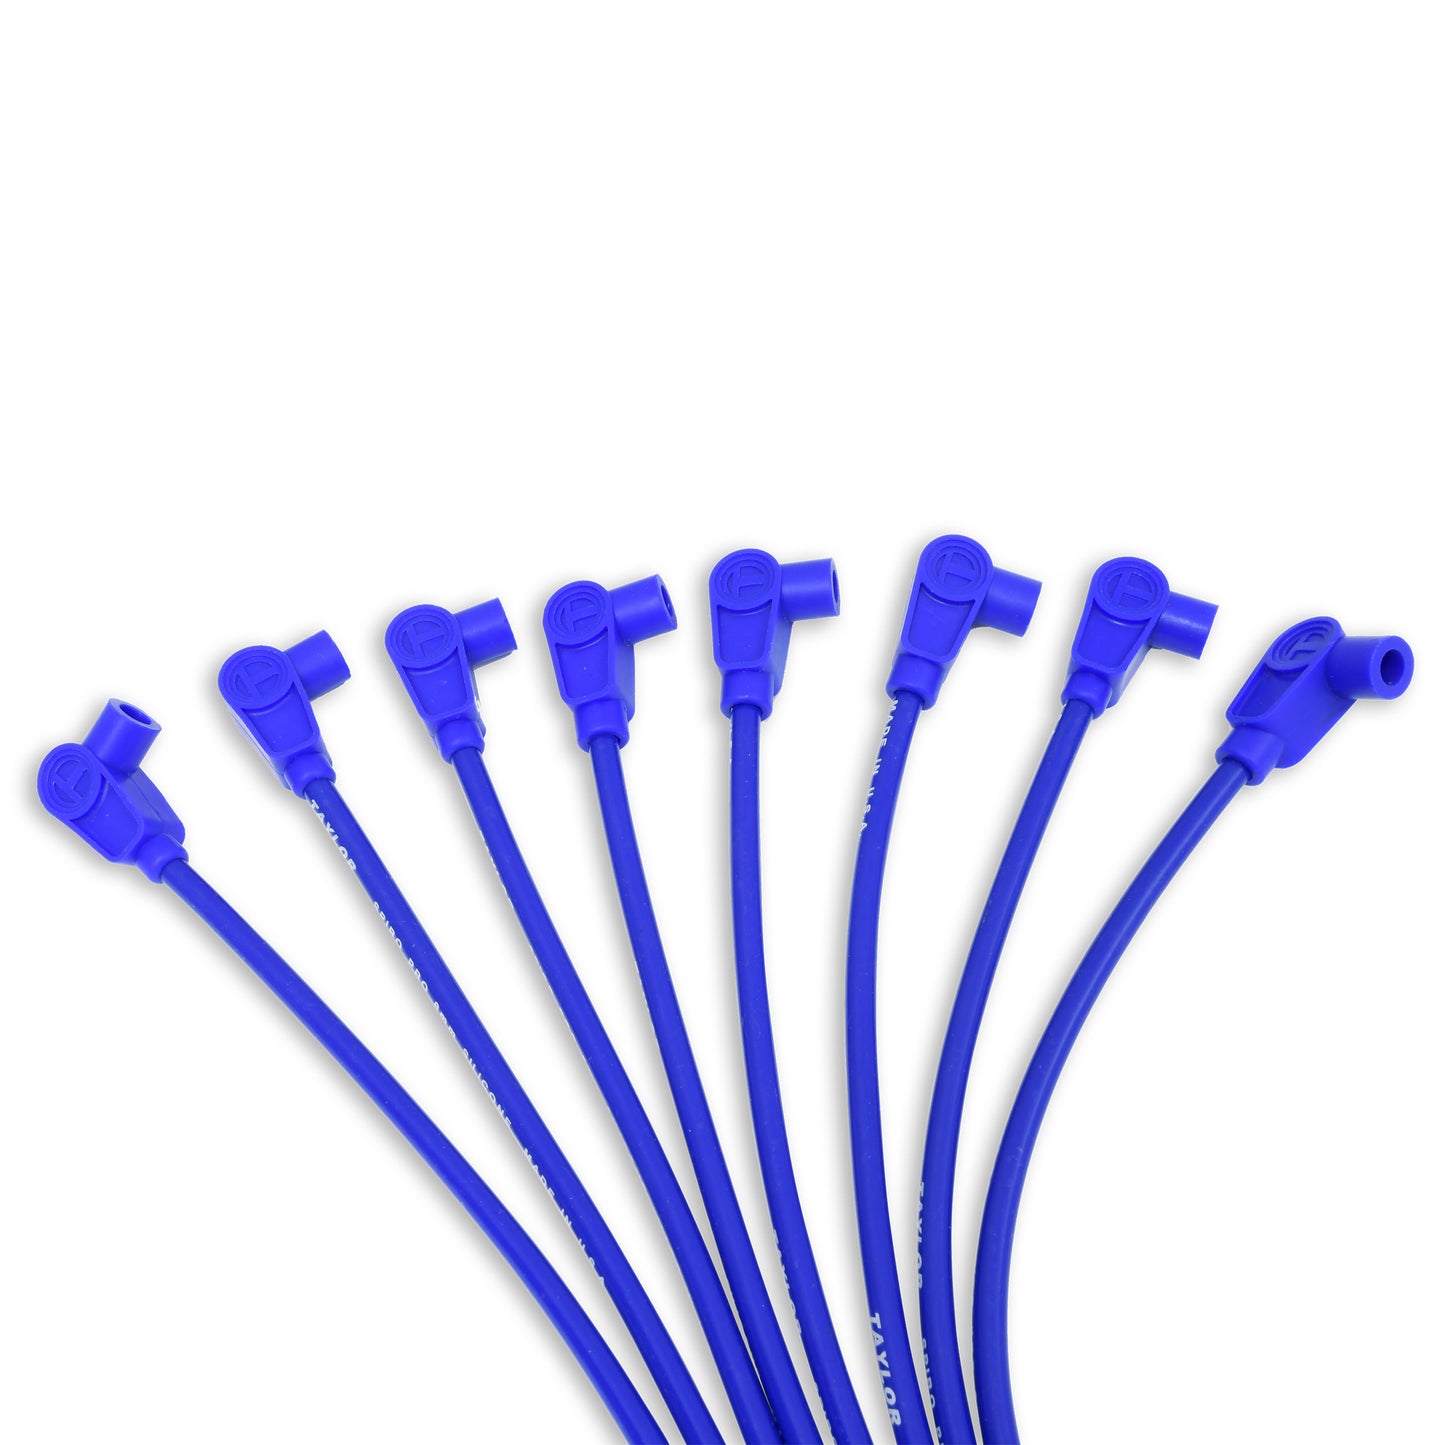 Taylor Cable 74601 8mm Spiro-Pro Custom Spark Plug Wires 8 cyl blue